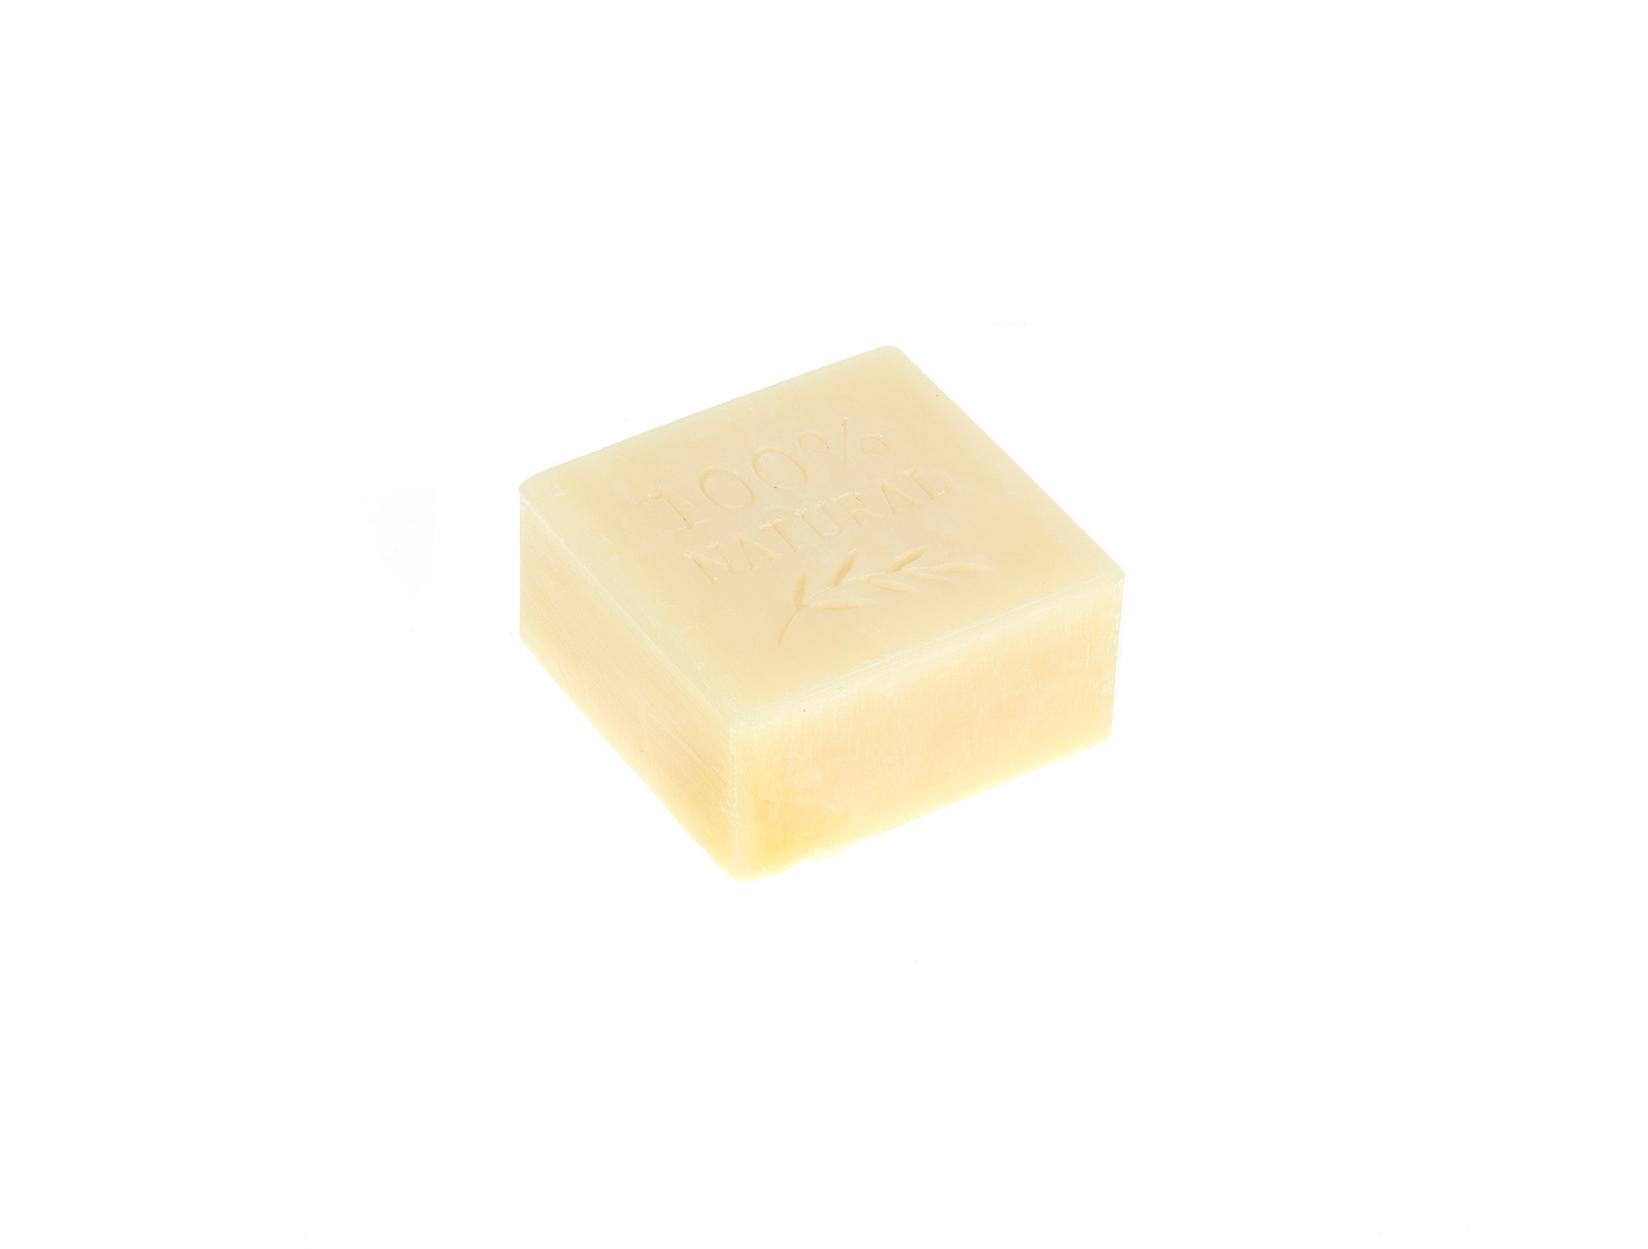 Selected image for MADAME COCO Répertoire Solid Sapun, 125g, Aloe Vera